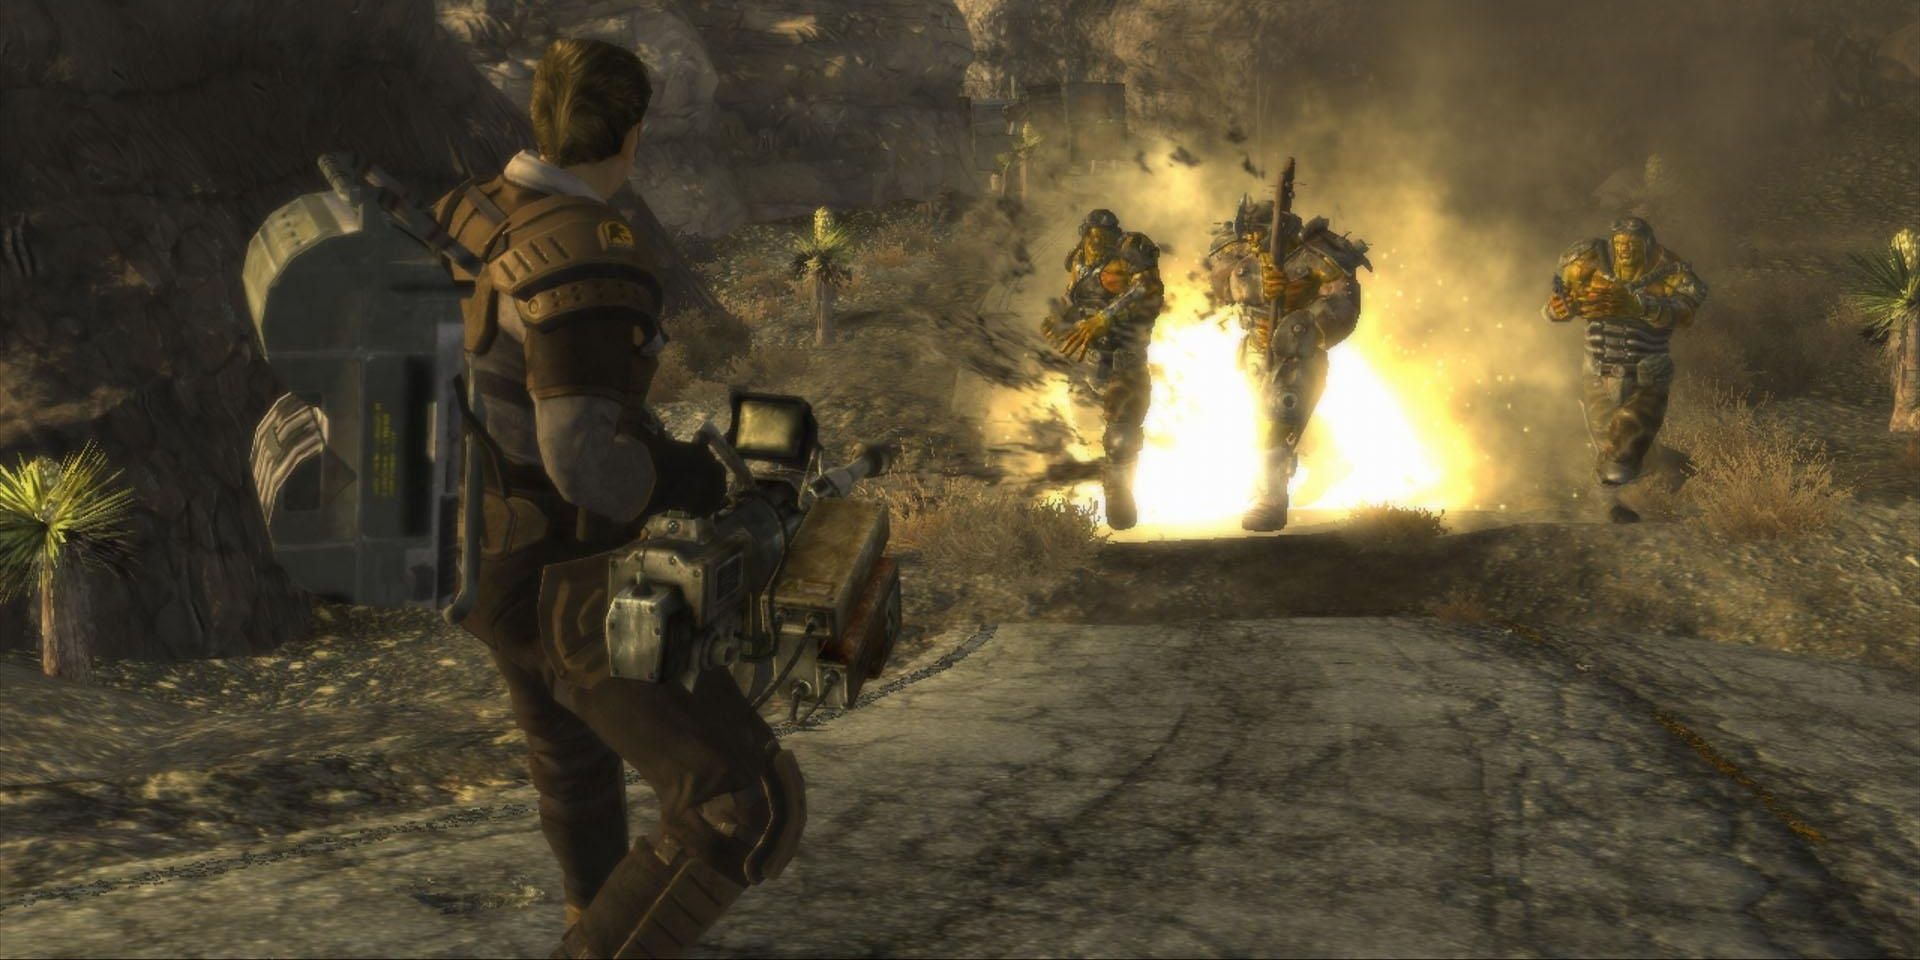 Gameplay of Fallout New Vegas